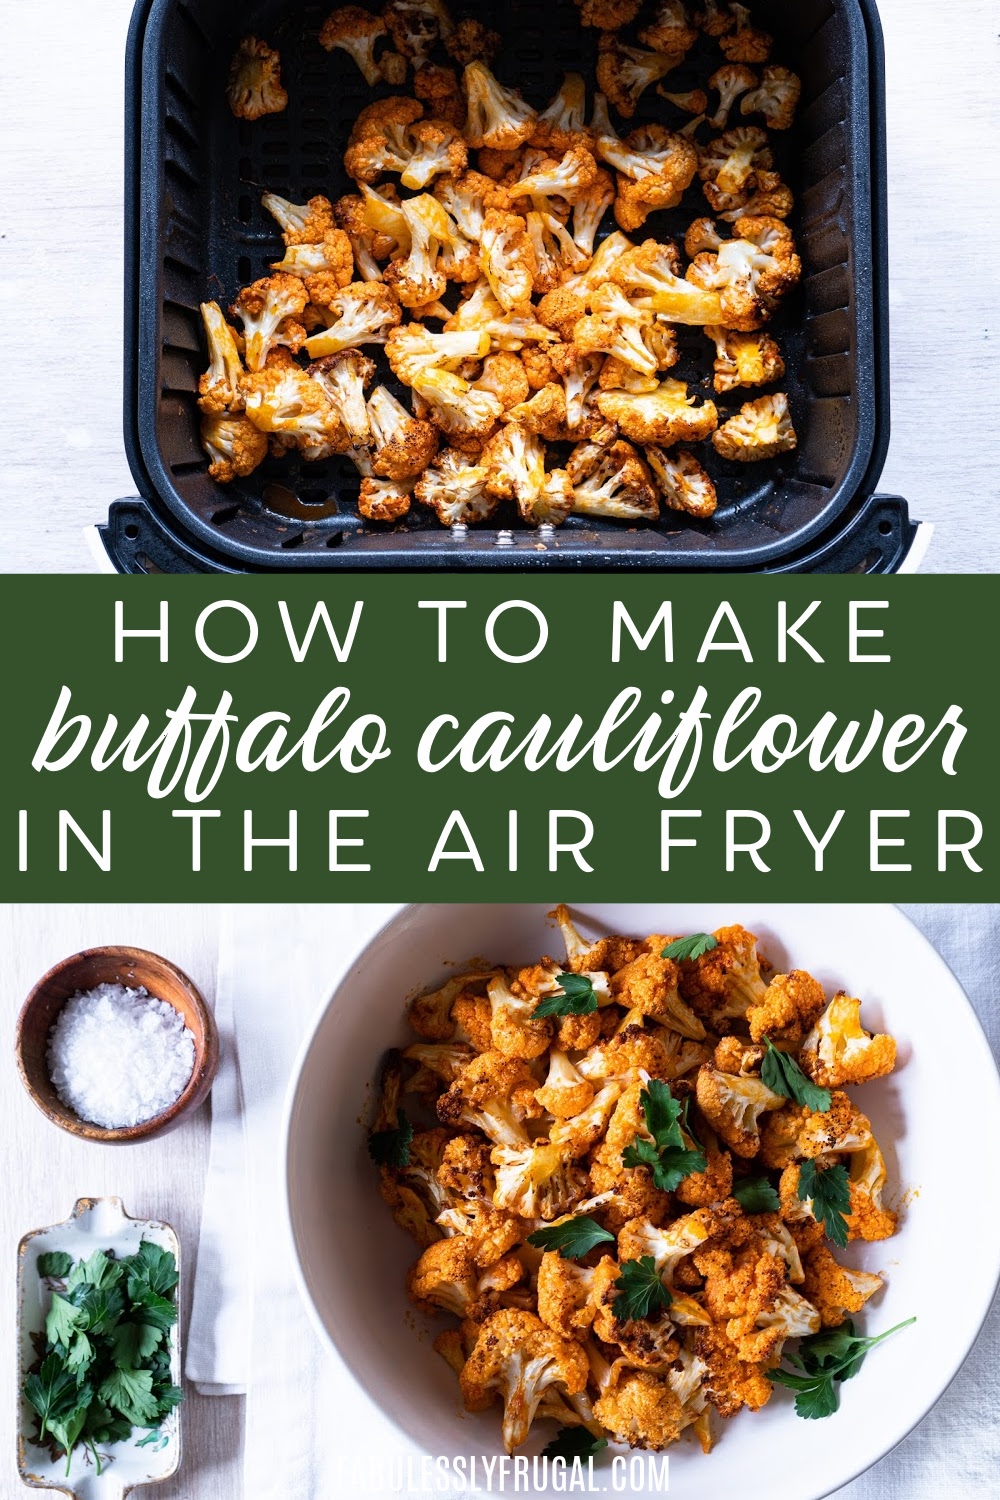 Air fryer buffalo cauliflower bites are easy and delicious!